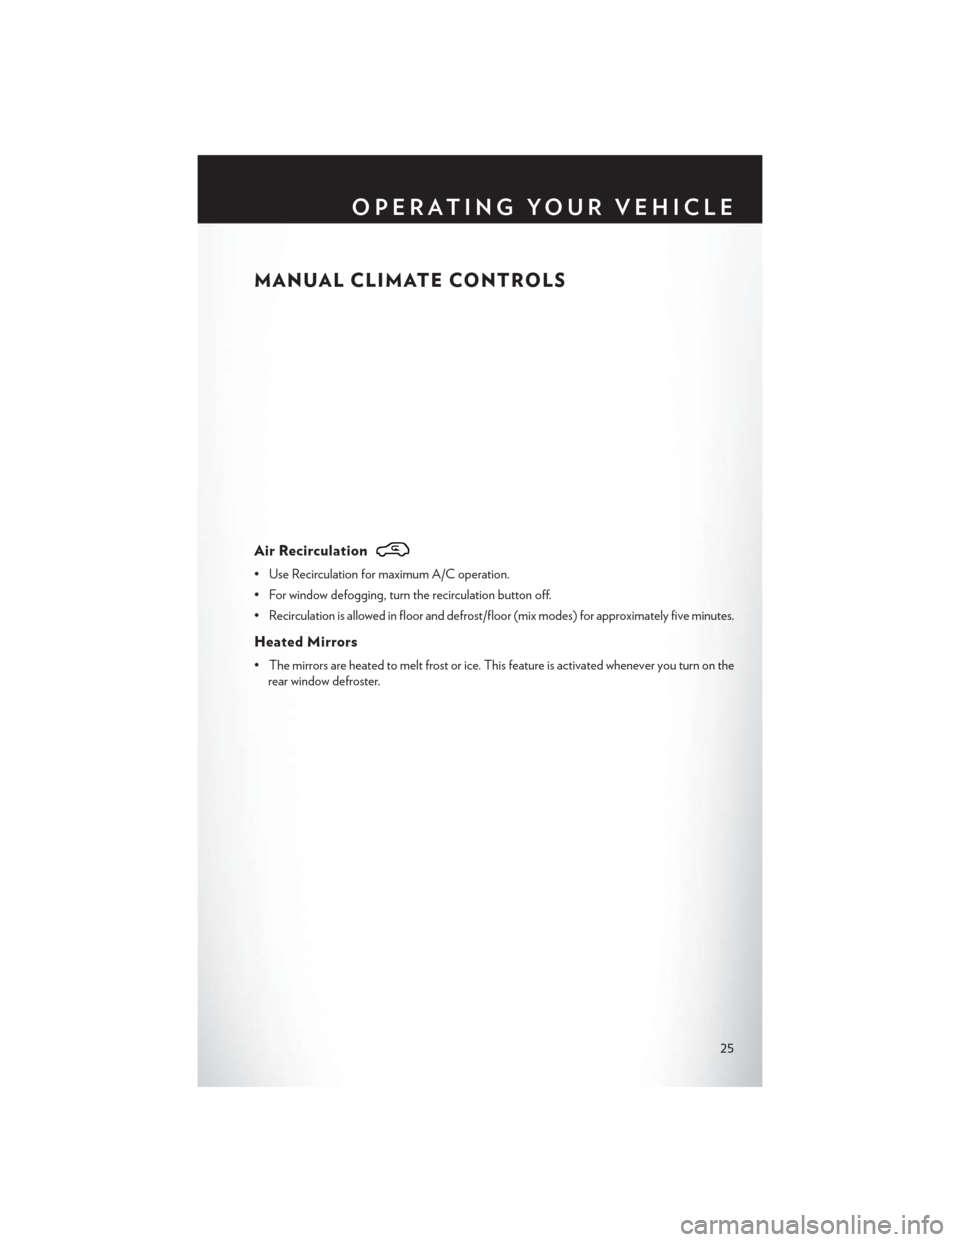 CHRYSLER 200 CONVERTIBLE 2014 1.G Owners Manual MANUAL CLIMATE CONTROLS
Air Recirculation
• Use Recirculation for maximum A/C operation.
• For window defogging, turn the recirculation button off.
• Recirculation is allowed in floor and defros